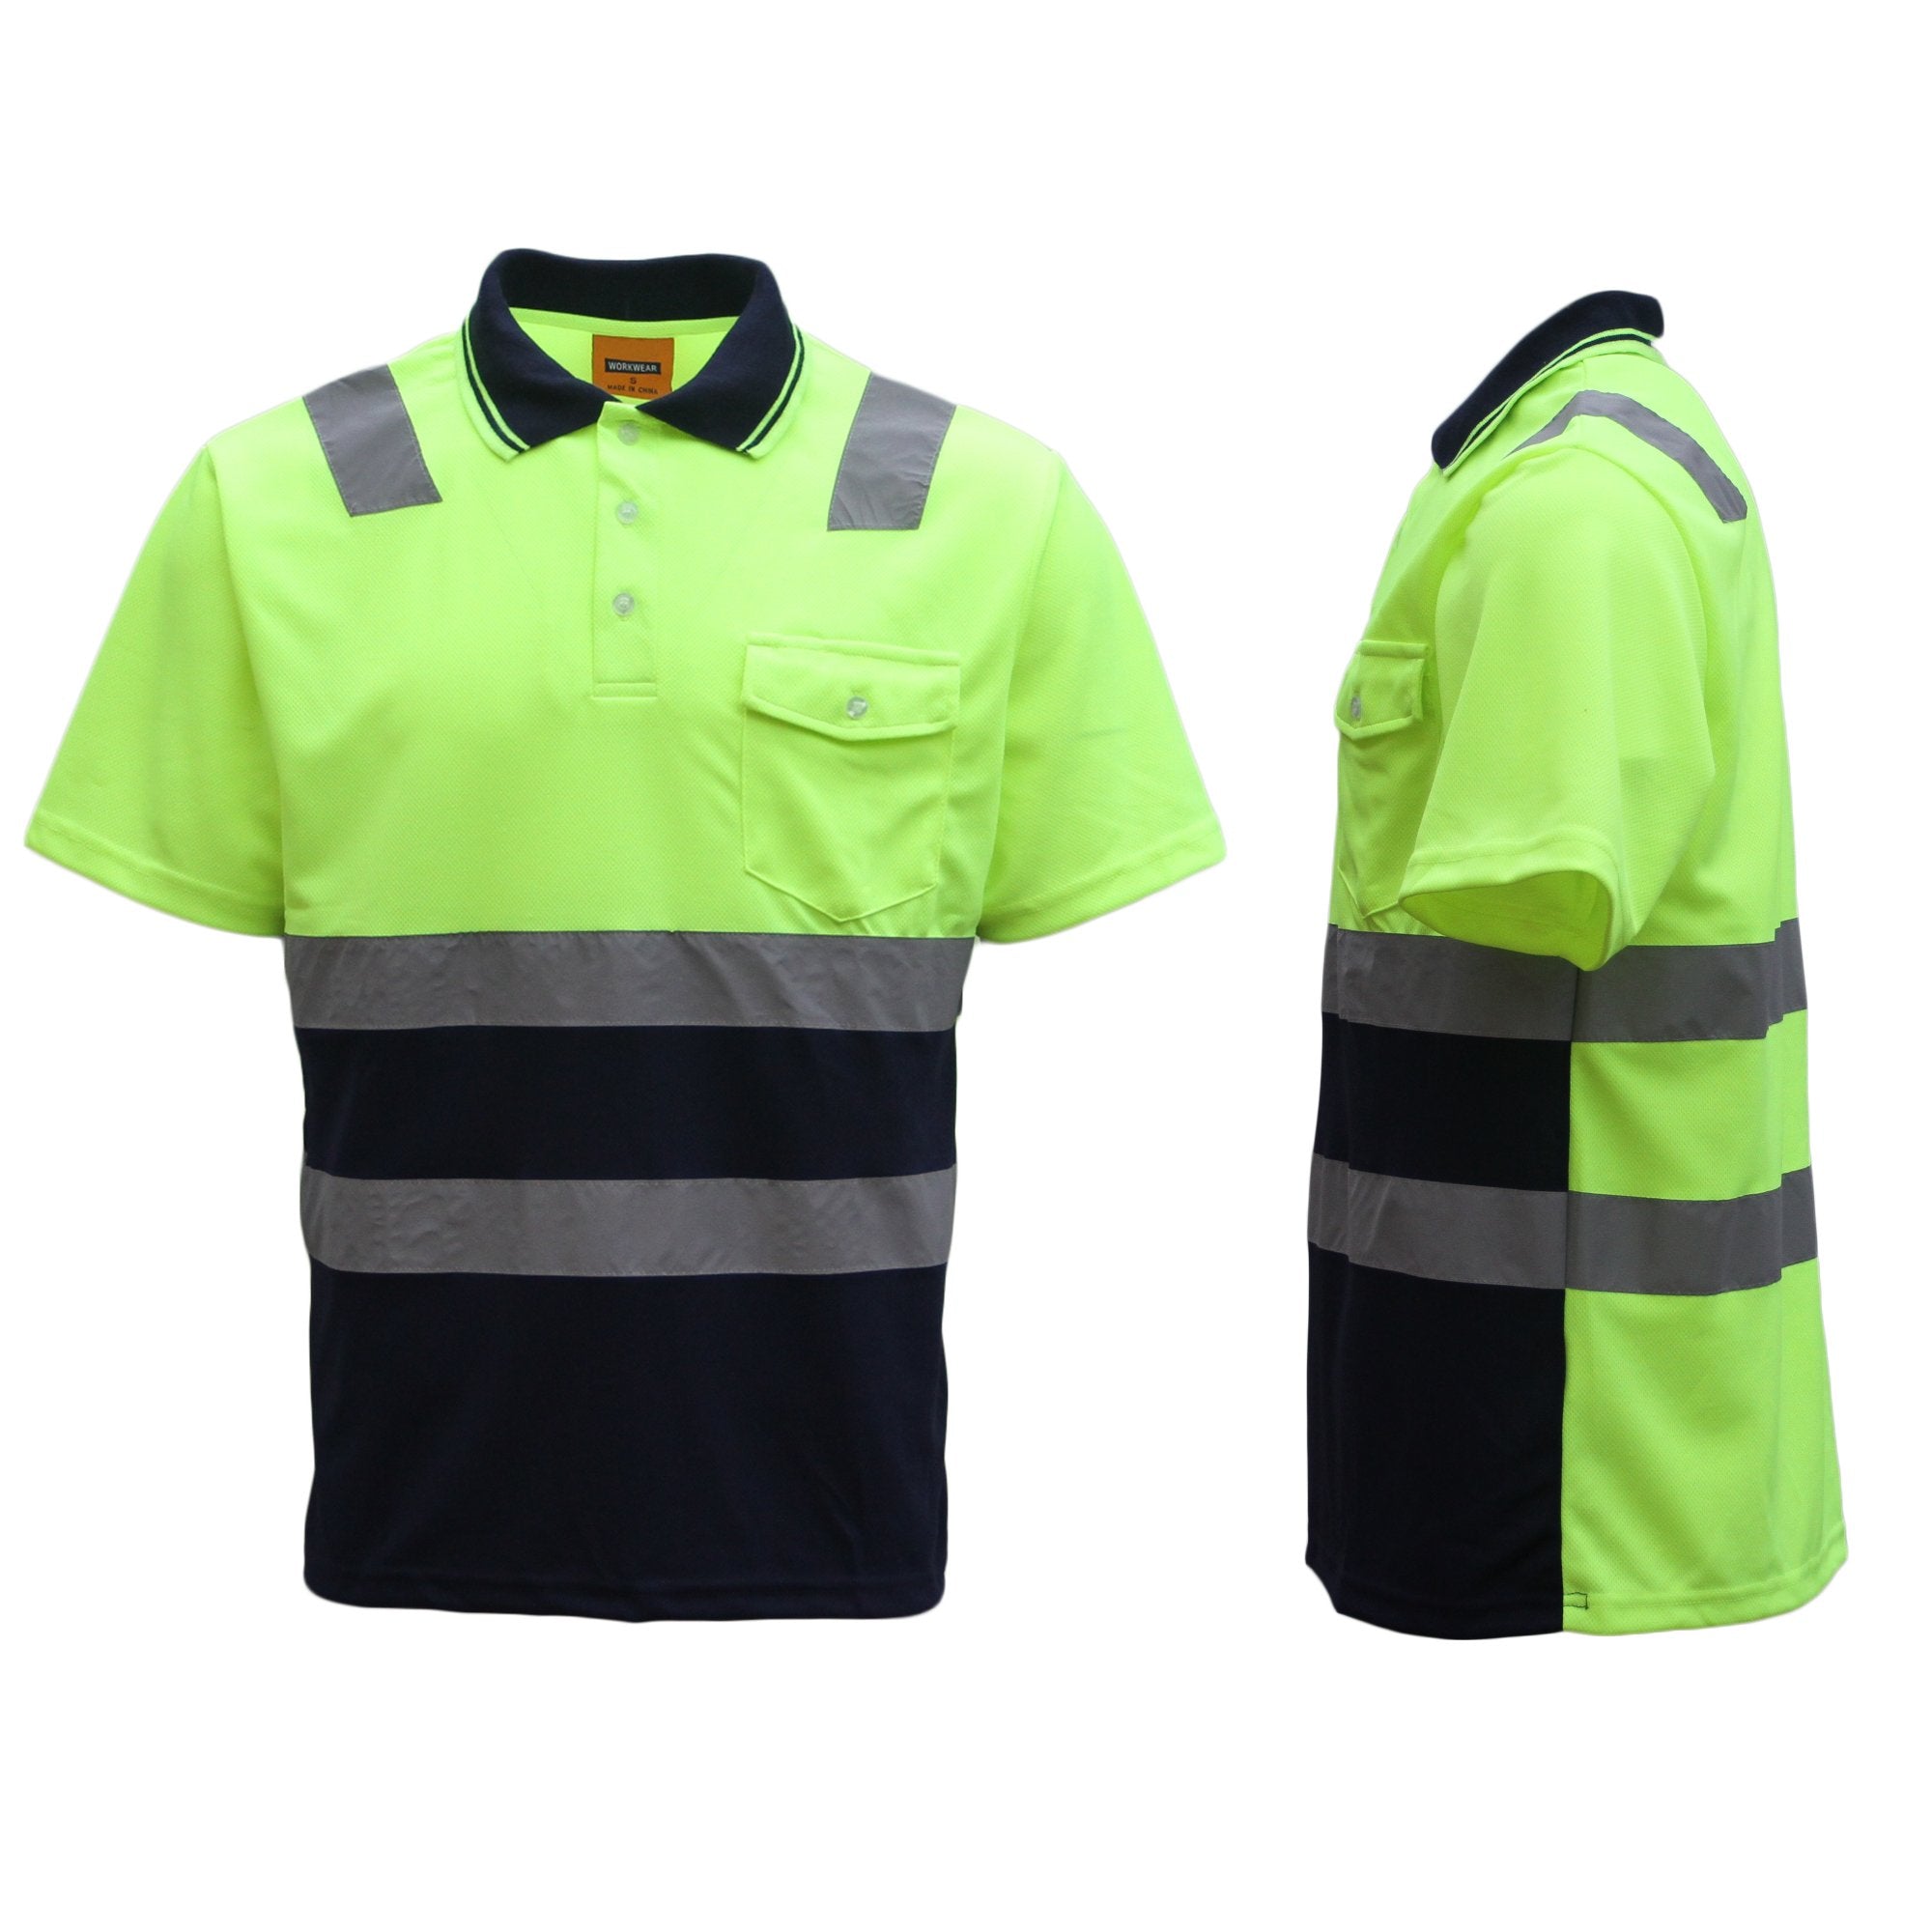 HI VIS Short Sleeve Workwear Shirt w Reflective Tape Cool Dry Safety Polo 2 Tone, Fluoro Yellow / Navy, XL